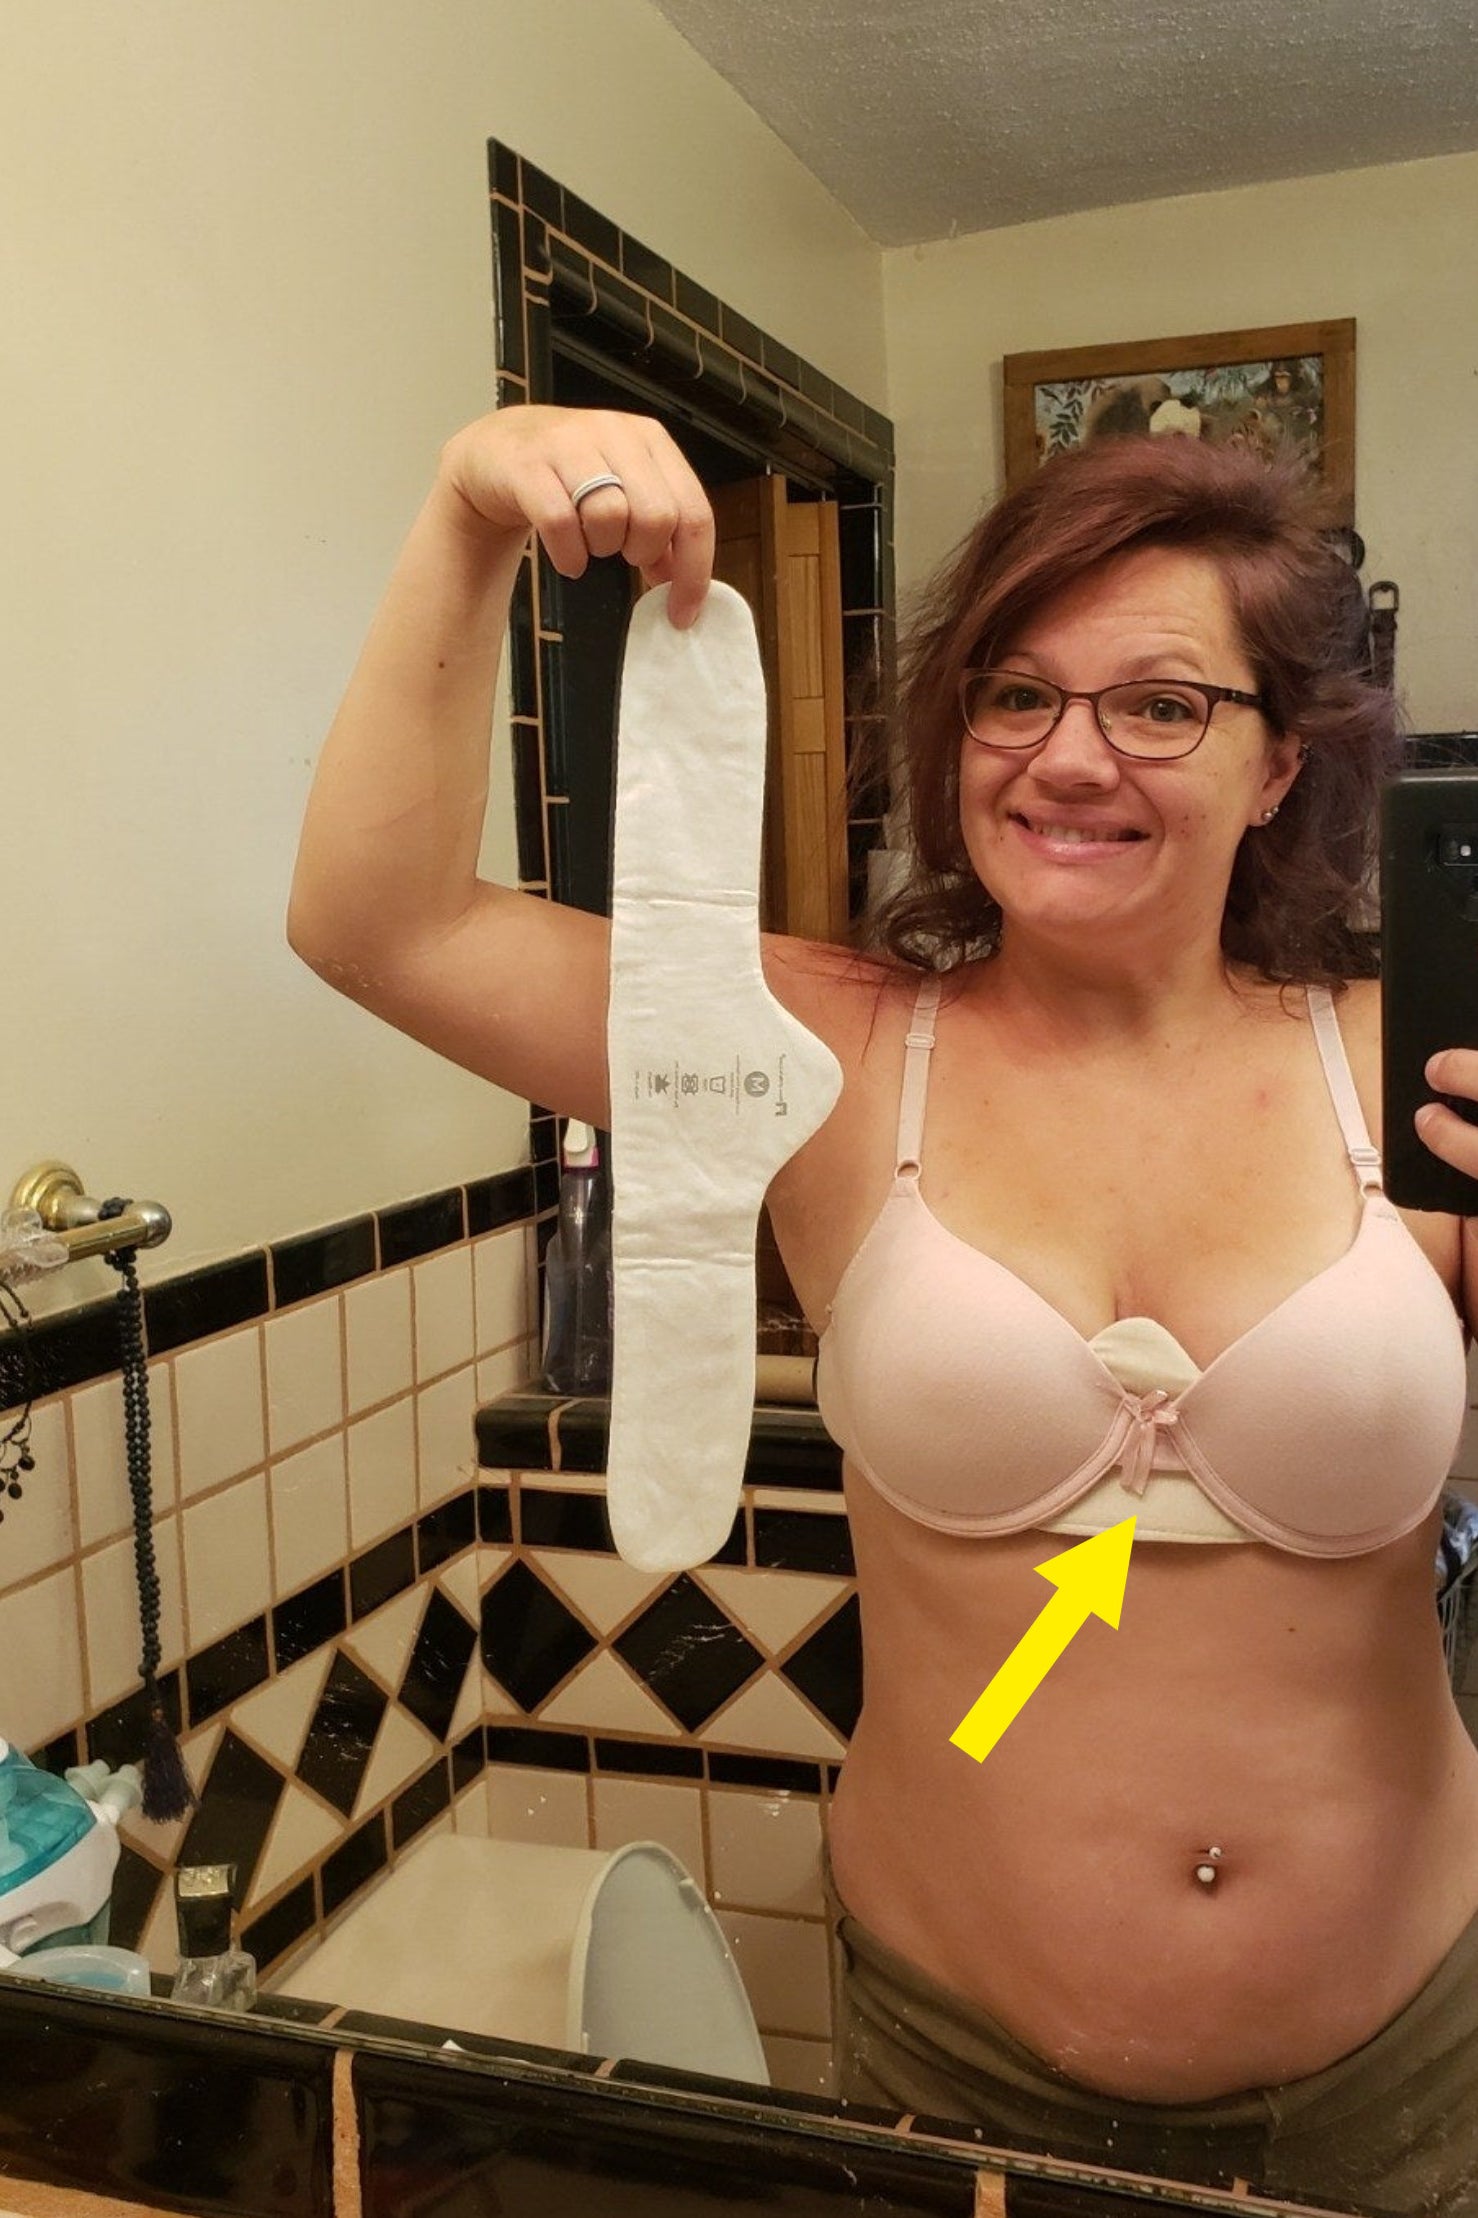 I sold my house to fund boob job - my huge 34H chest stopped me